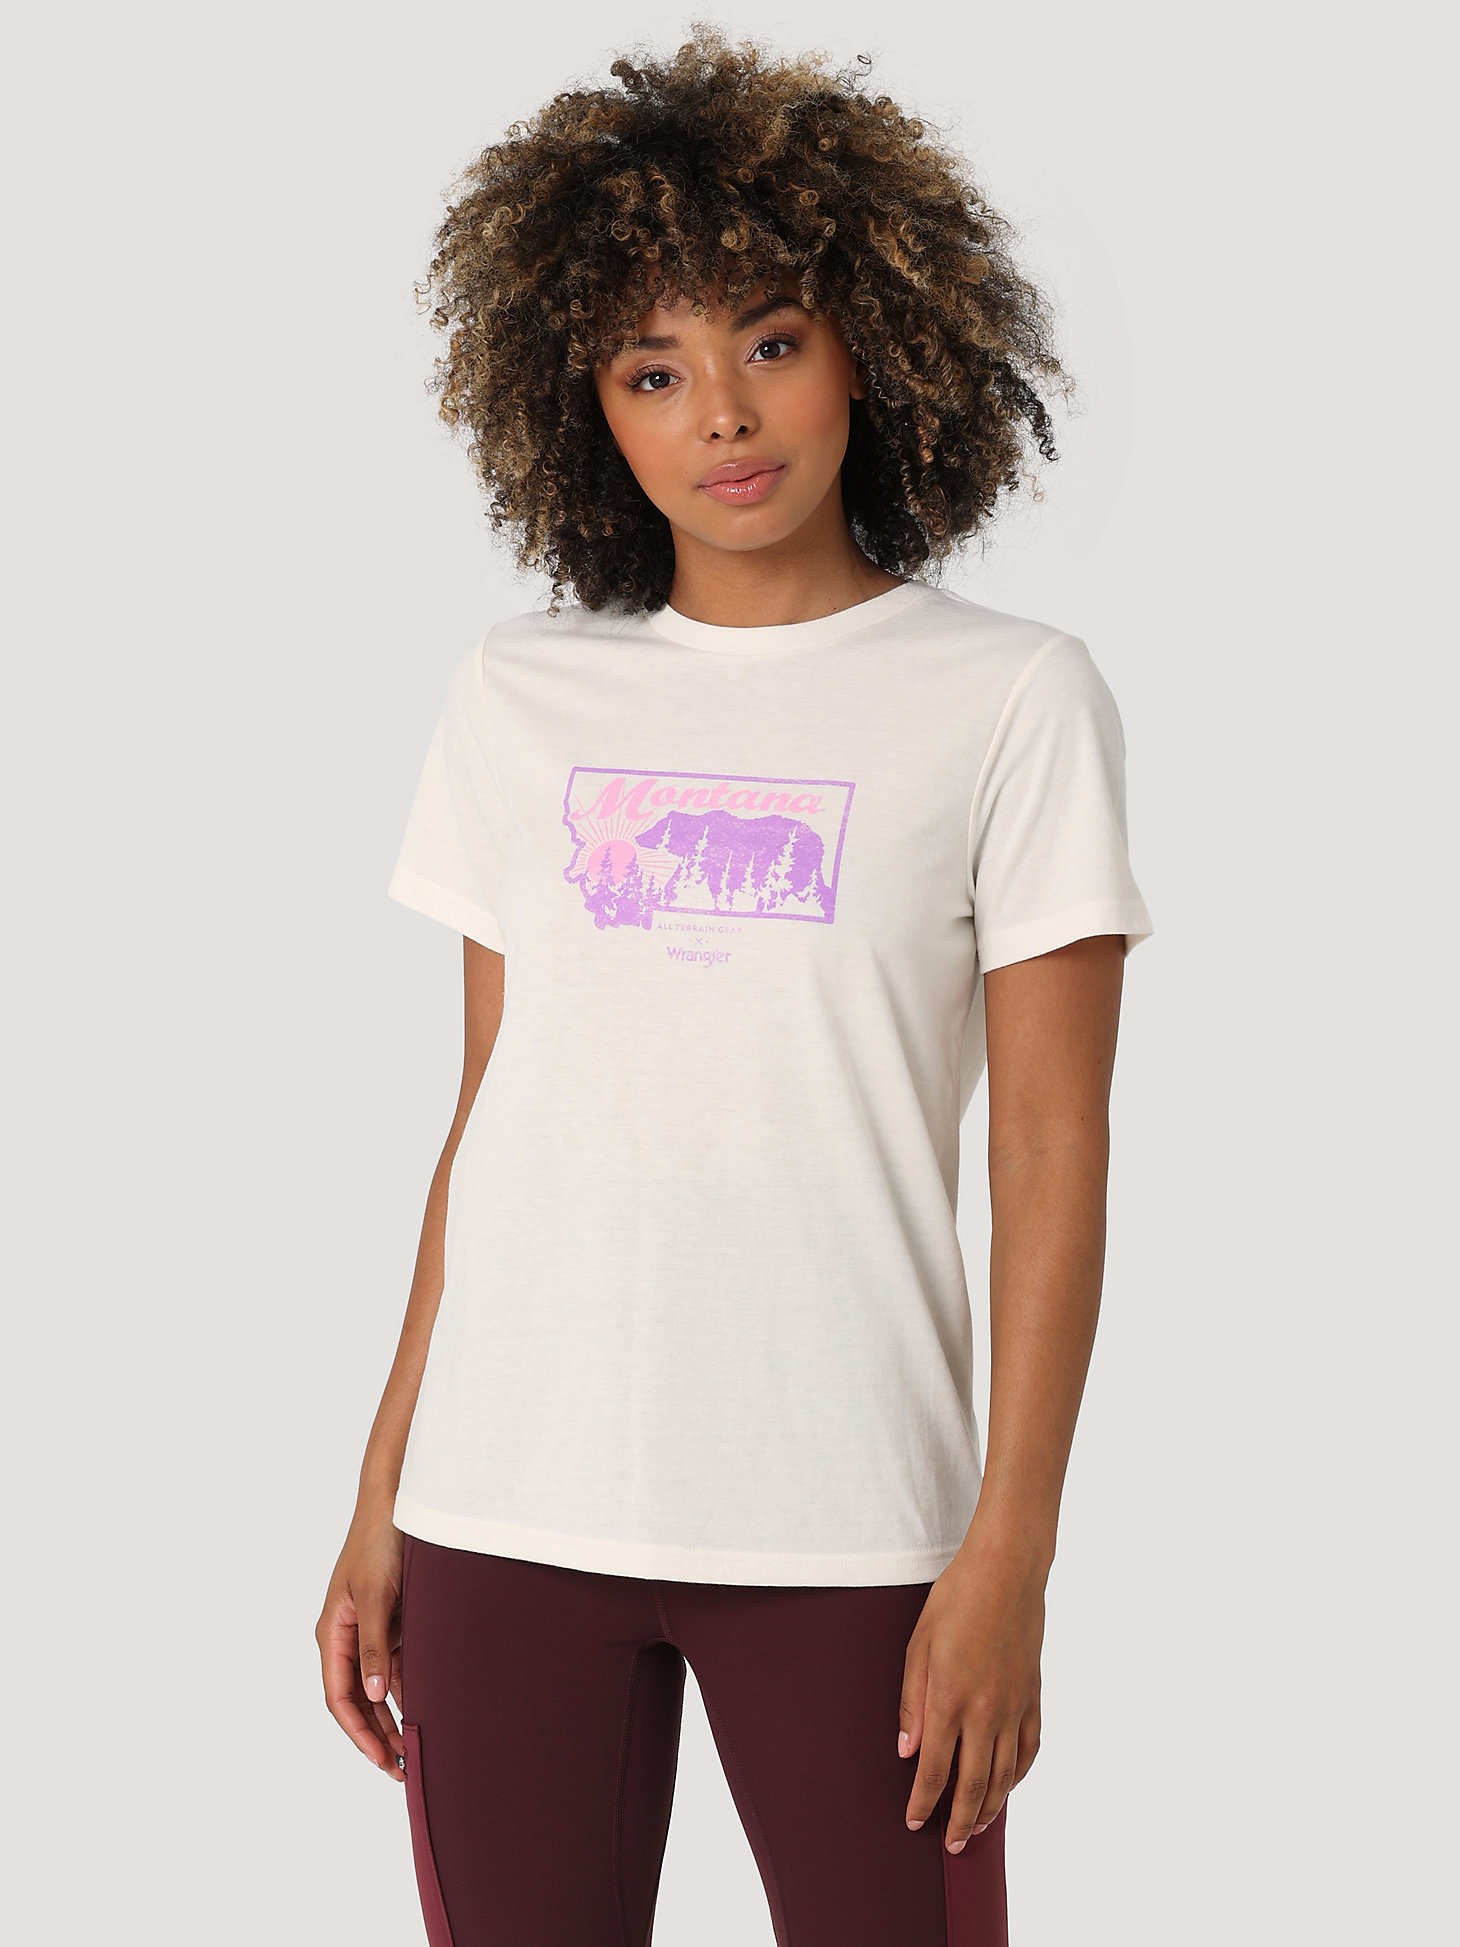 ATG By Wrangler™ Women's Graphic Tee in Marshmallow main view